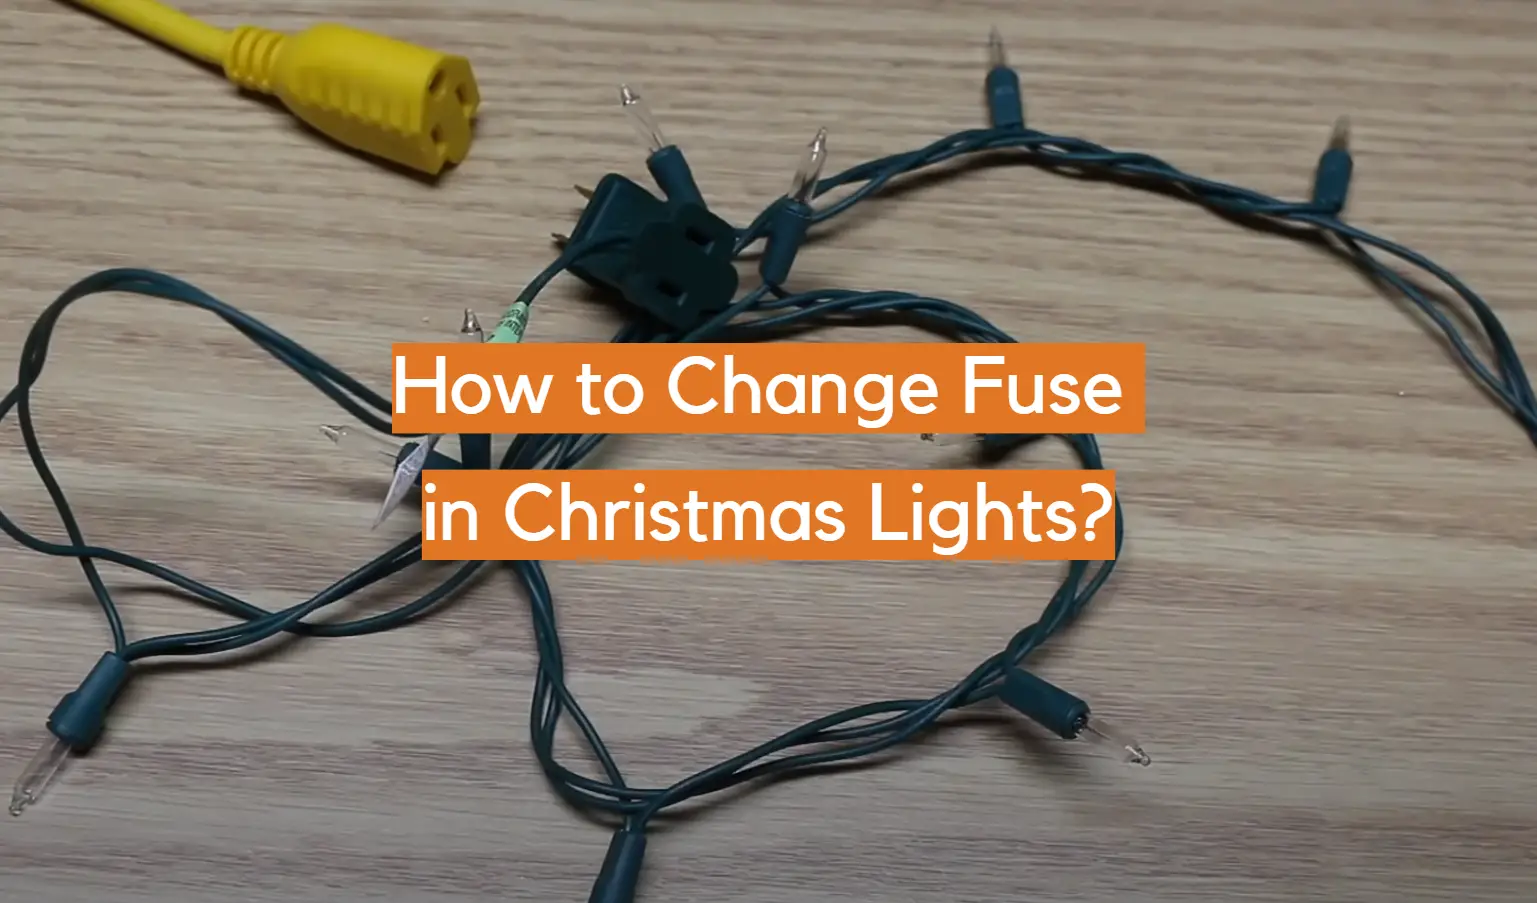 How to Change Fuse in Christmas Lights?